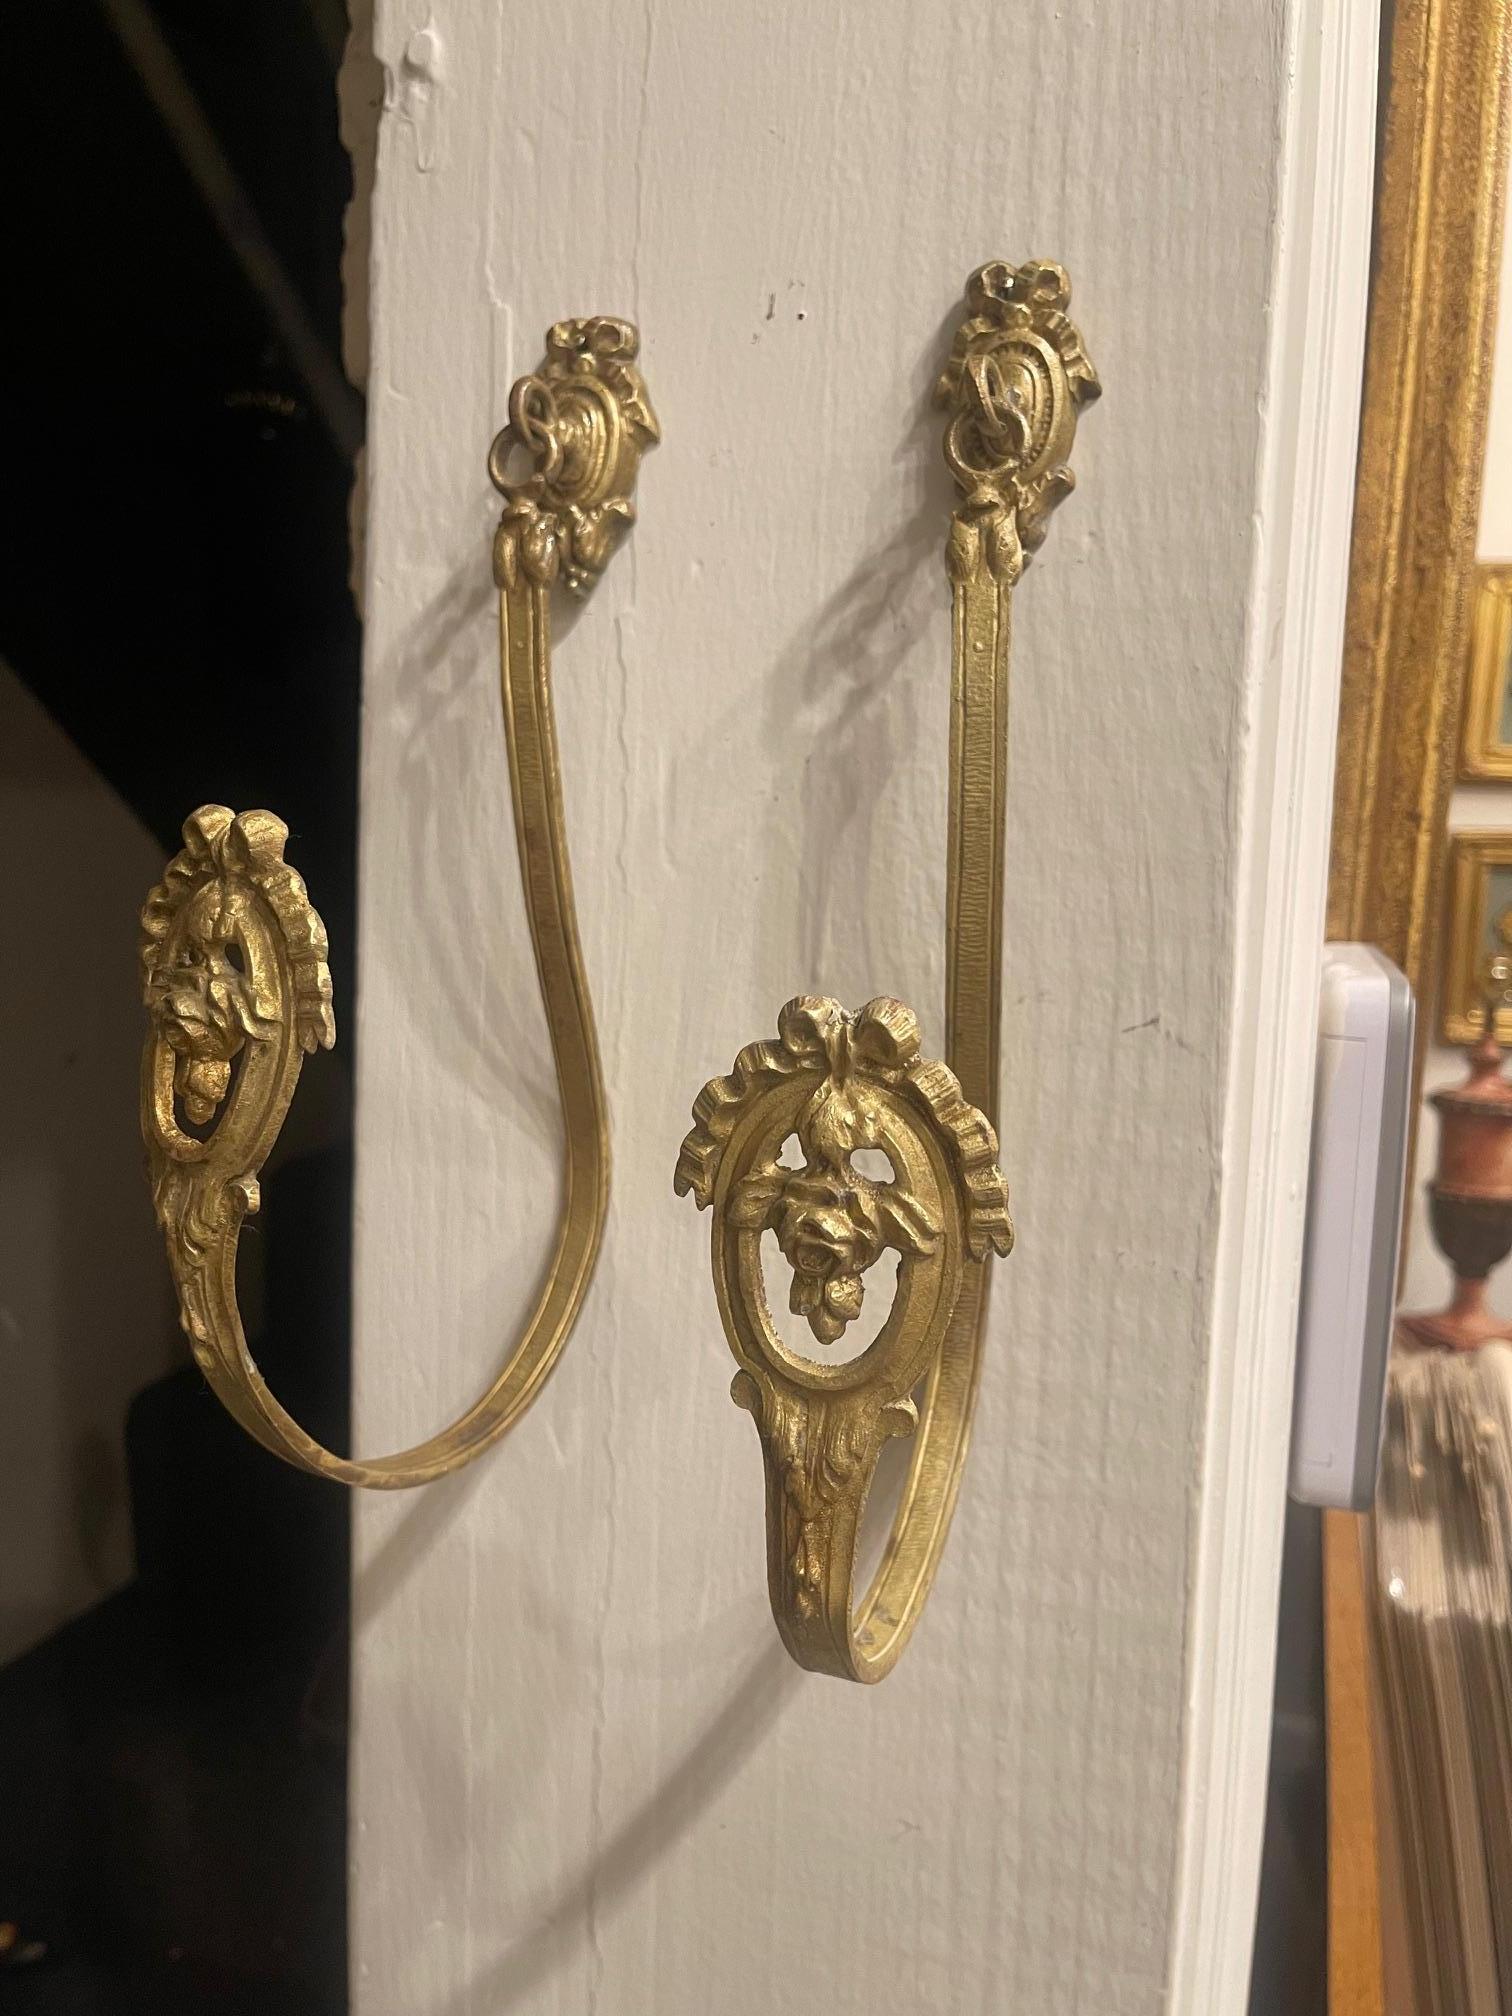 Pair of French Bronze and Brass Curtain Tiebacks or Curtain Holders